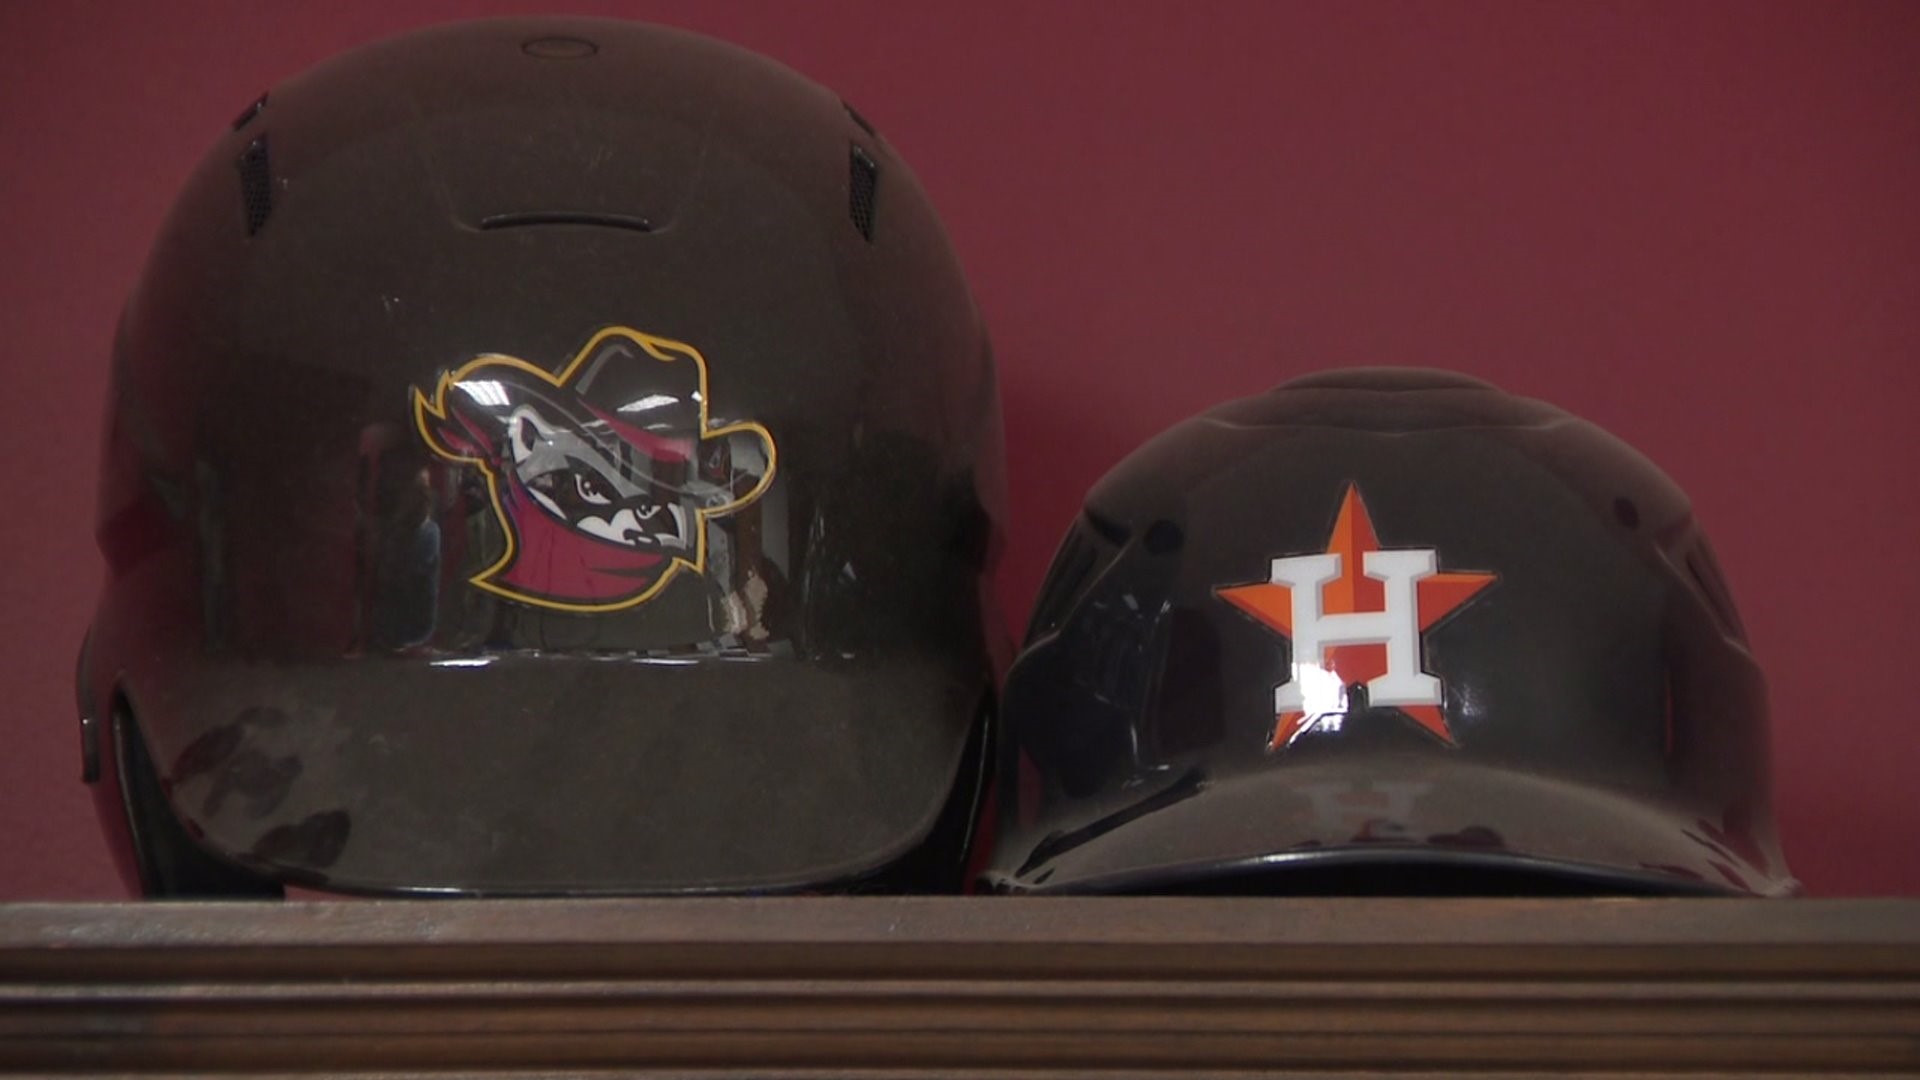 River Bandits extend helping hand to Astros